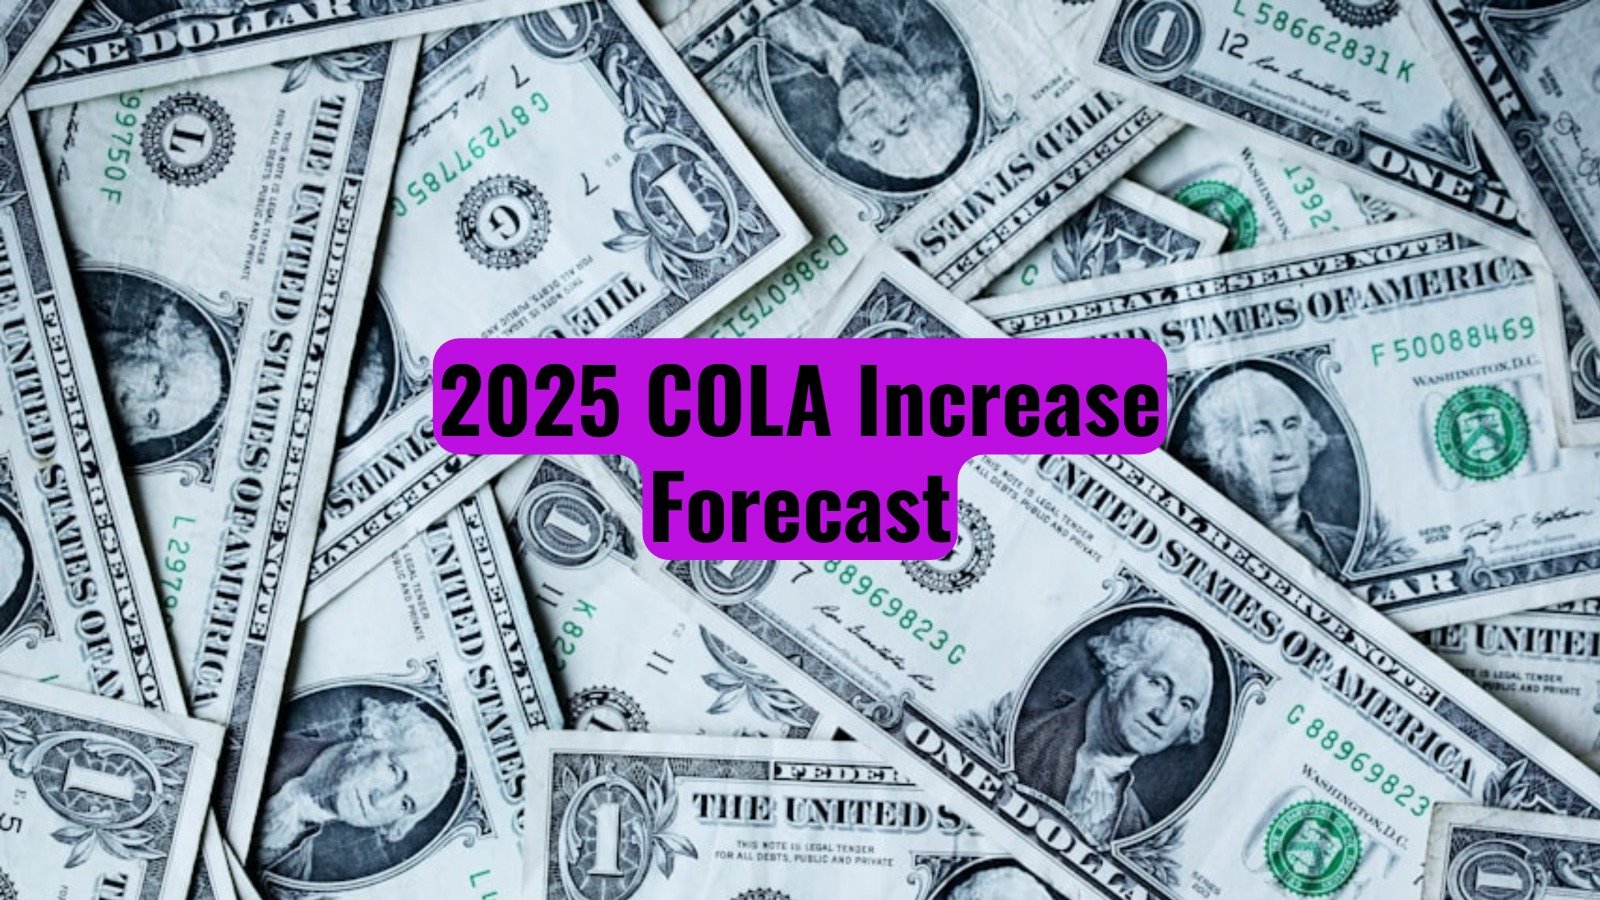 2025 COLA Increase Forecast Potential Impact on Medicare